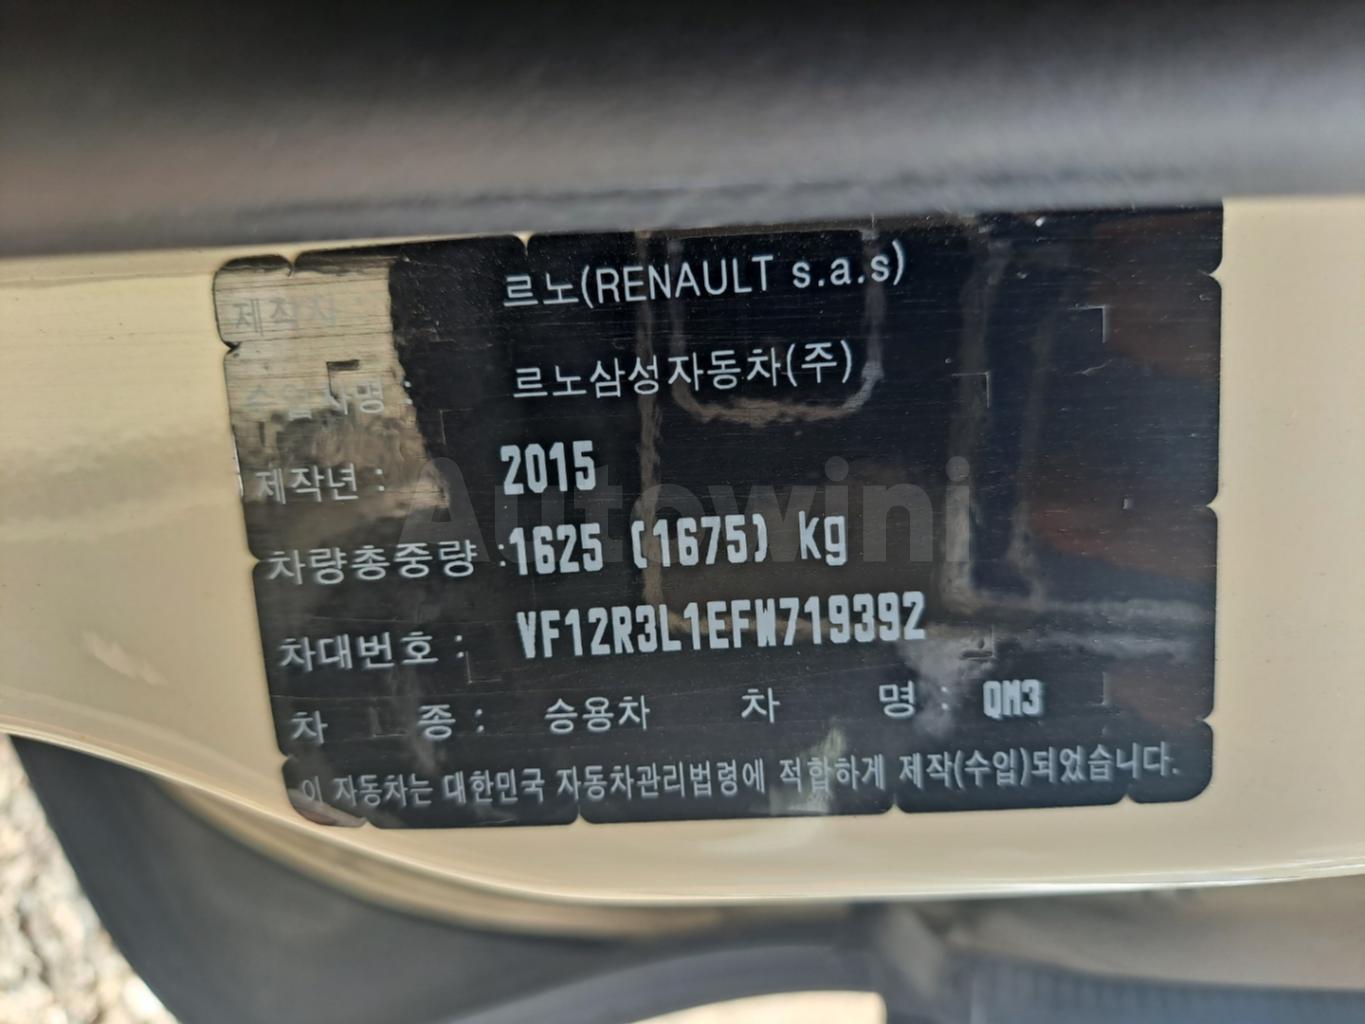 2015 RENAULT SAMSUNG QM3 RE/ANDROID SCREEN/NO ACCIDENT - 39